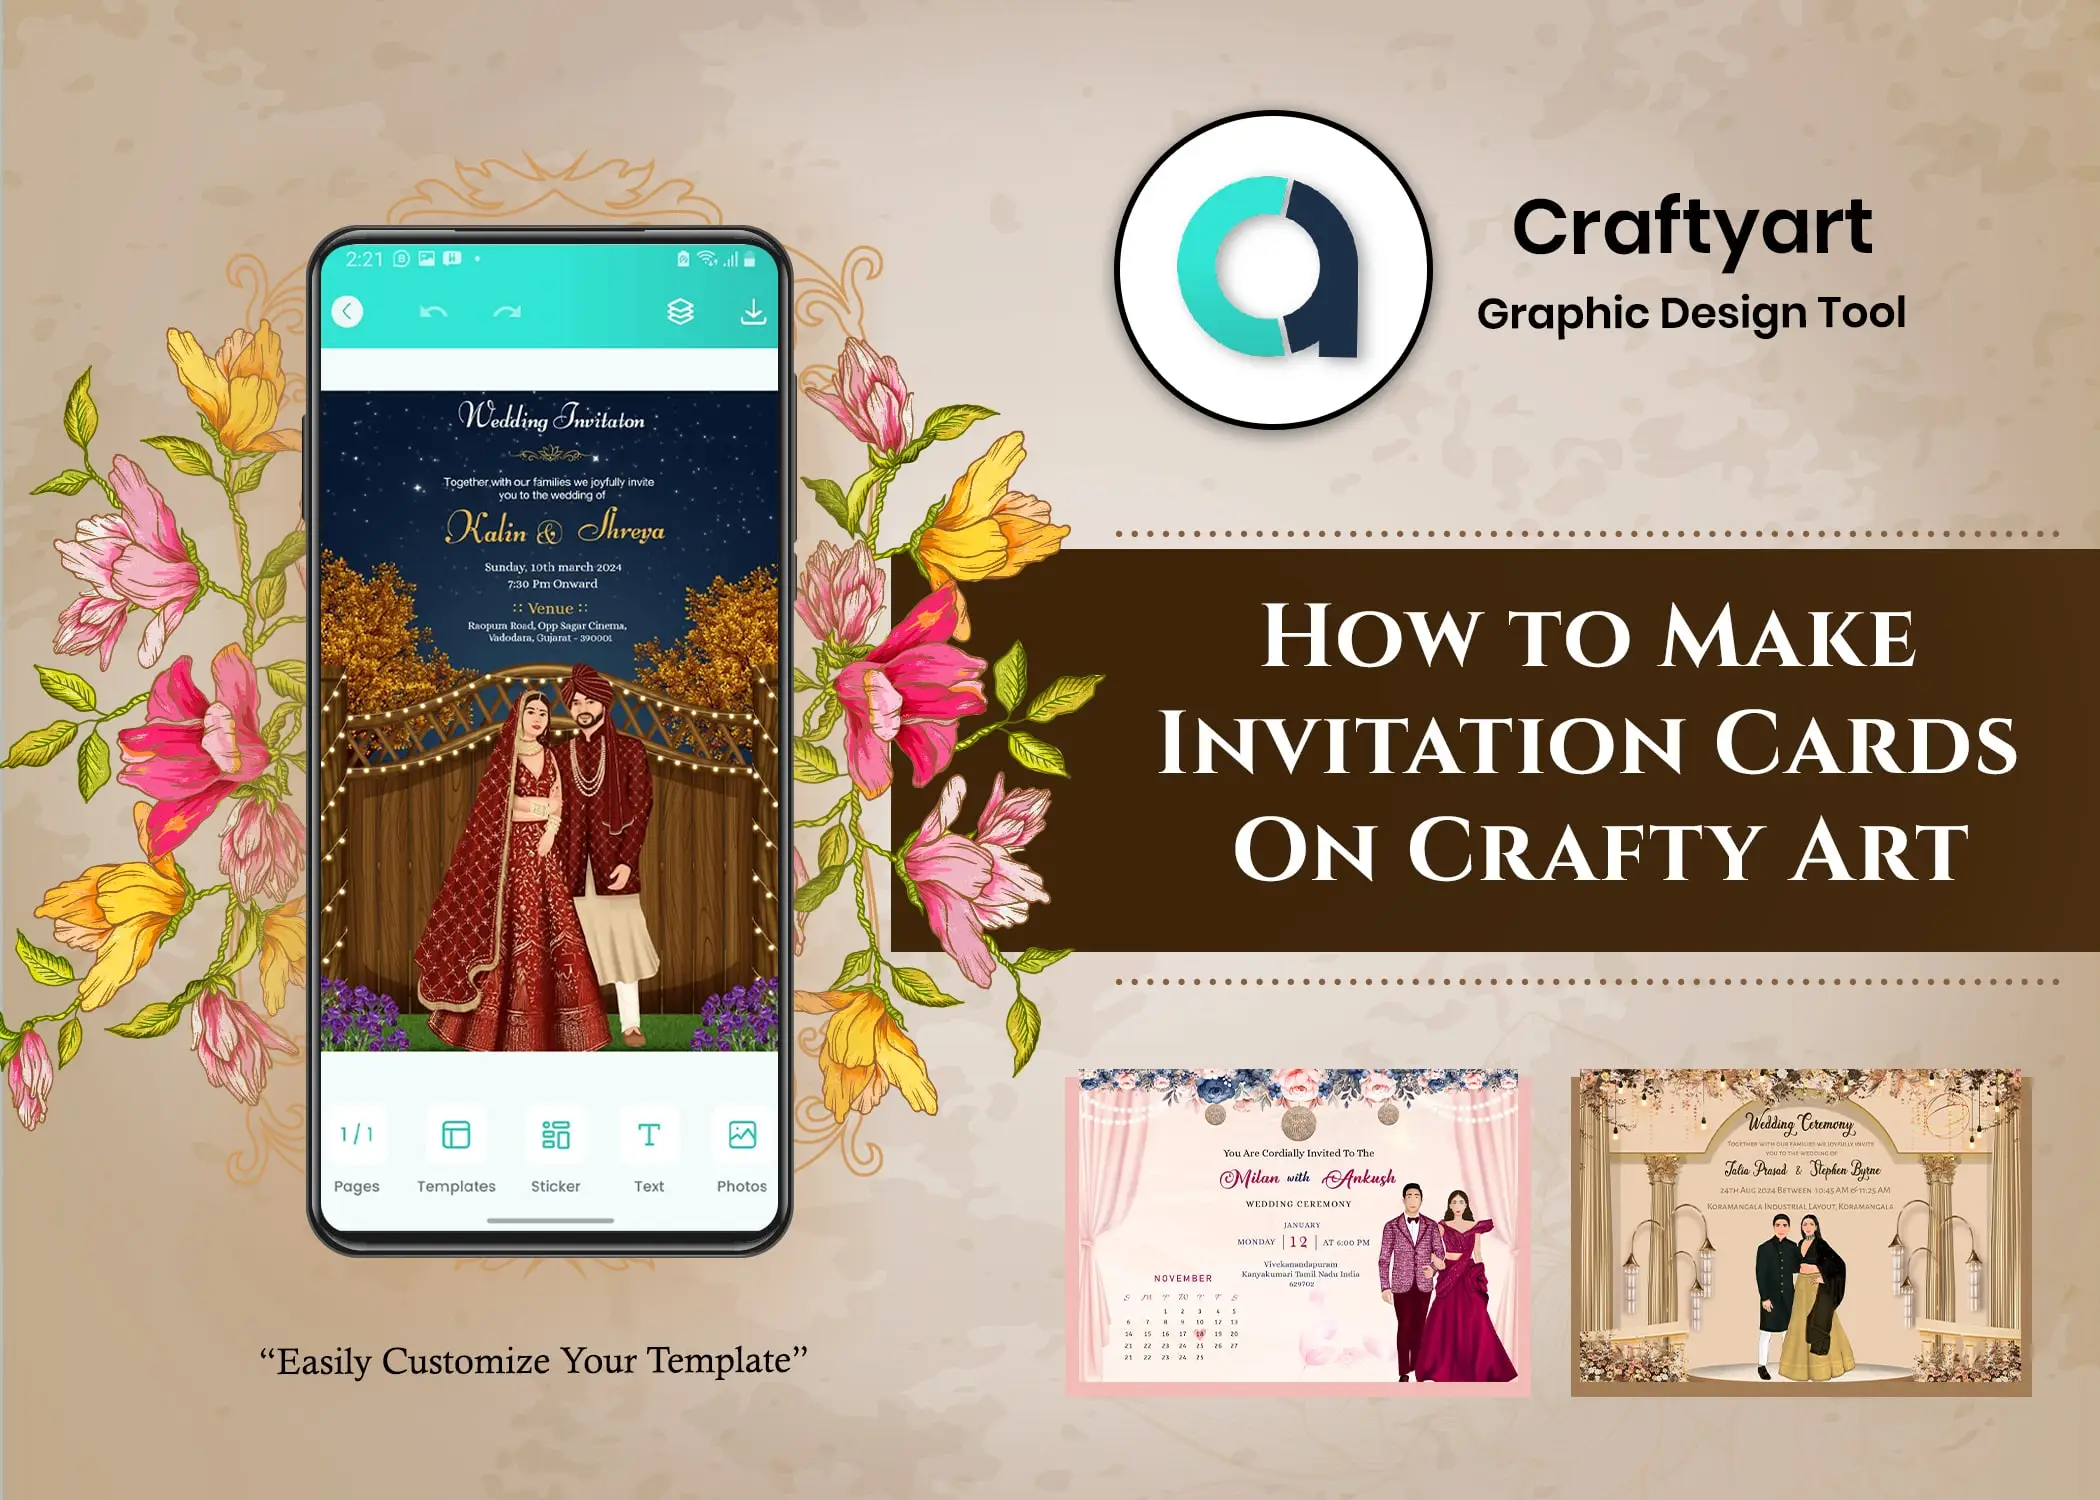 How to Make Invitation Cards On Crafty Art